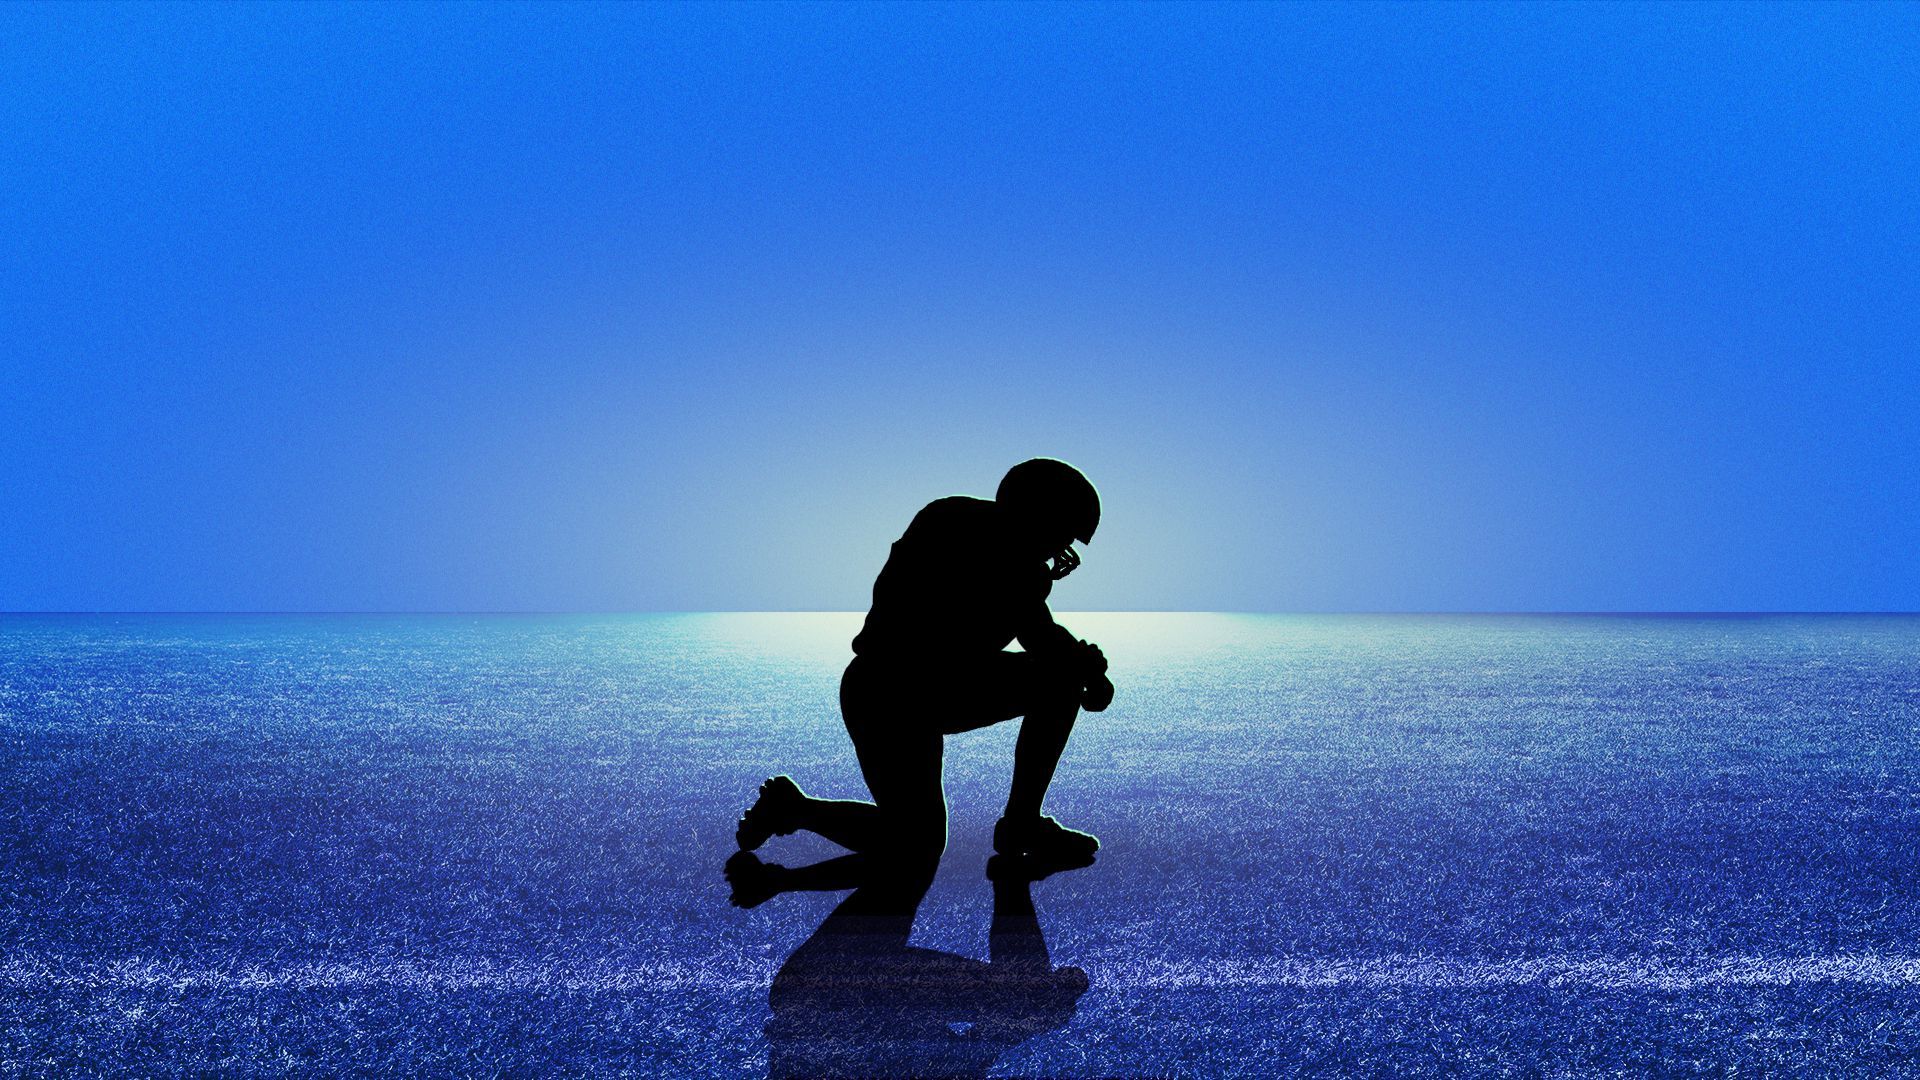 Illustration of a football player in silhouette kneeling on a field